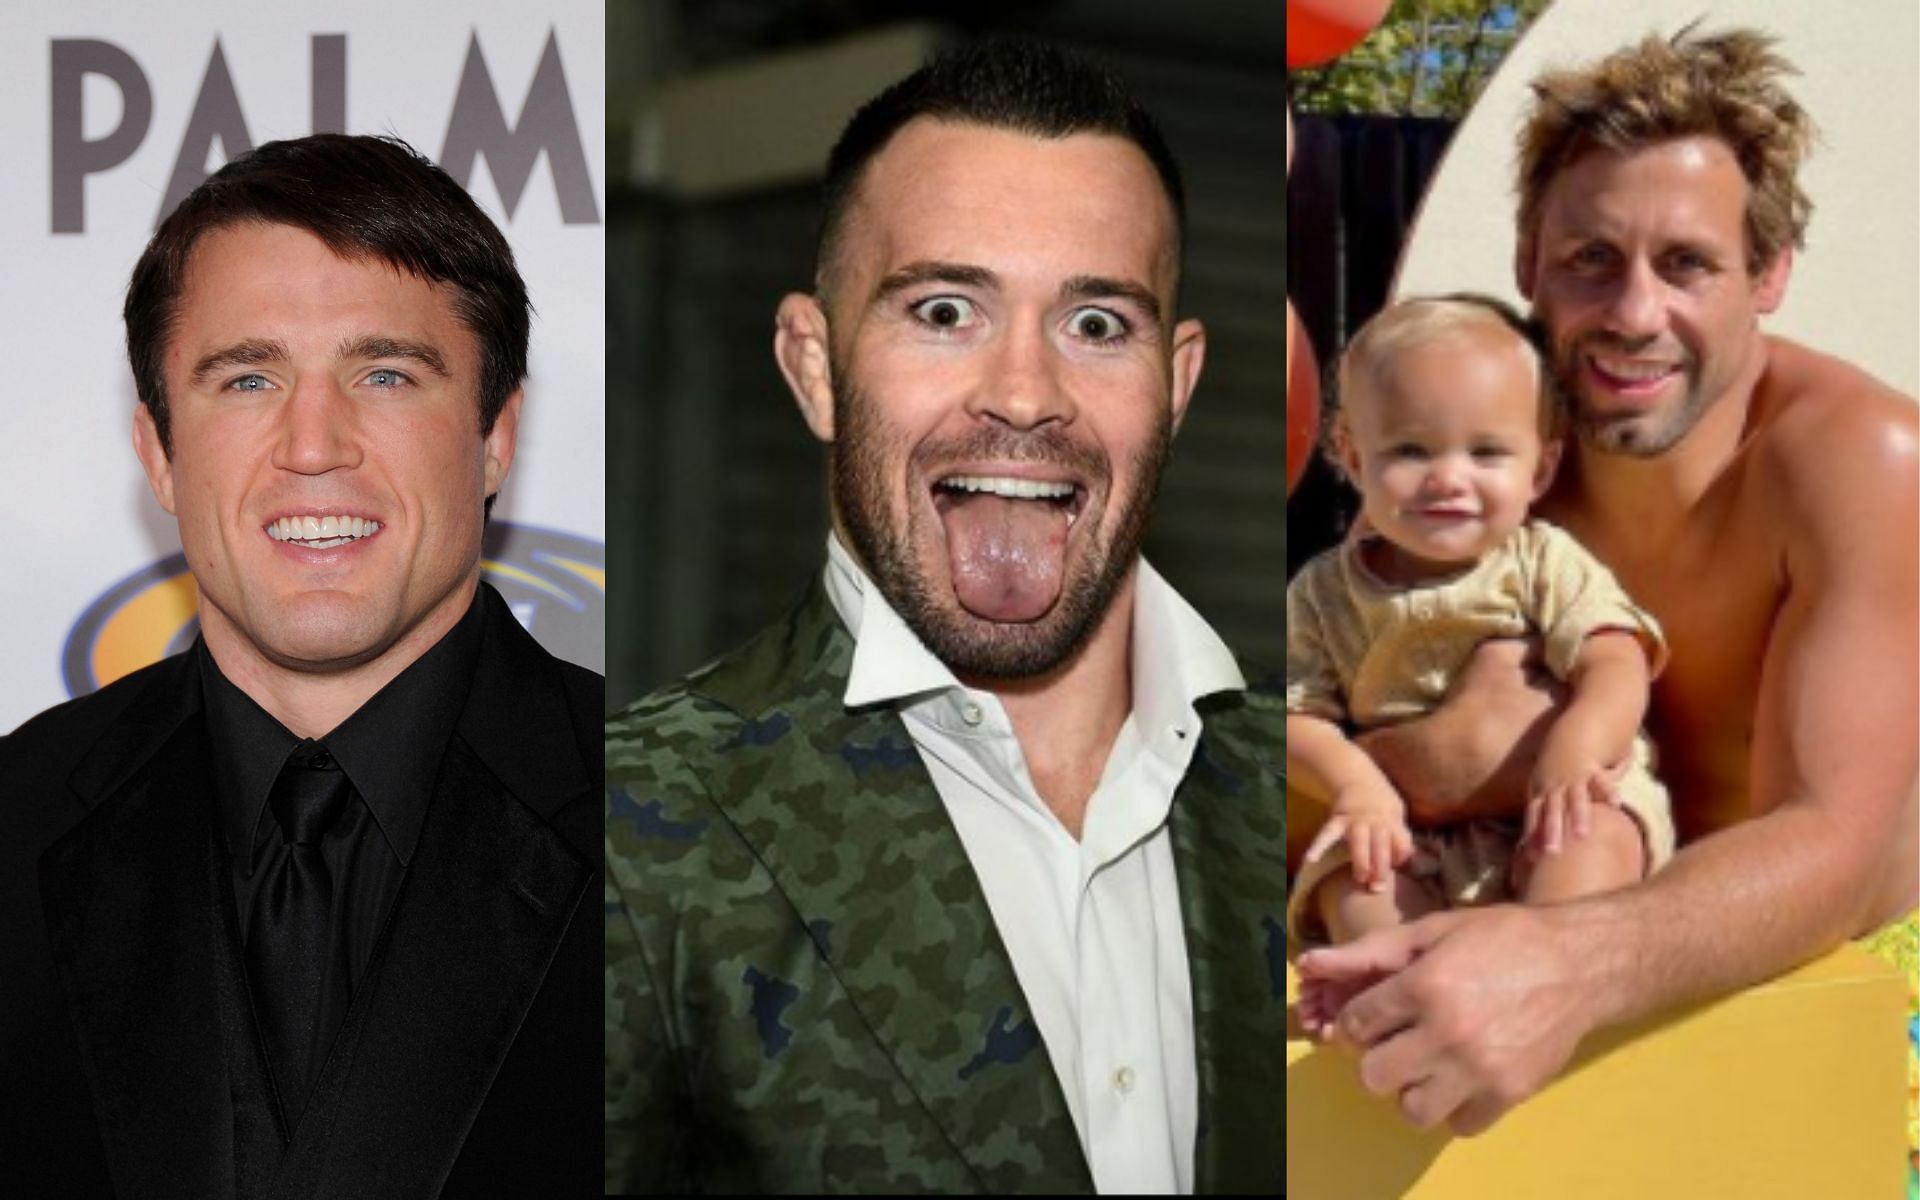 Chael Sonnen (Left), Colby Covington (Middle), Urijah Faber (Right) [Images courtesy: @urijahfaber @colbycovmma]